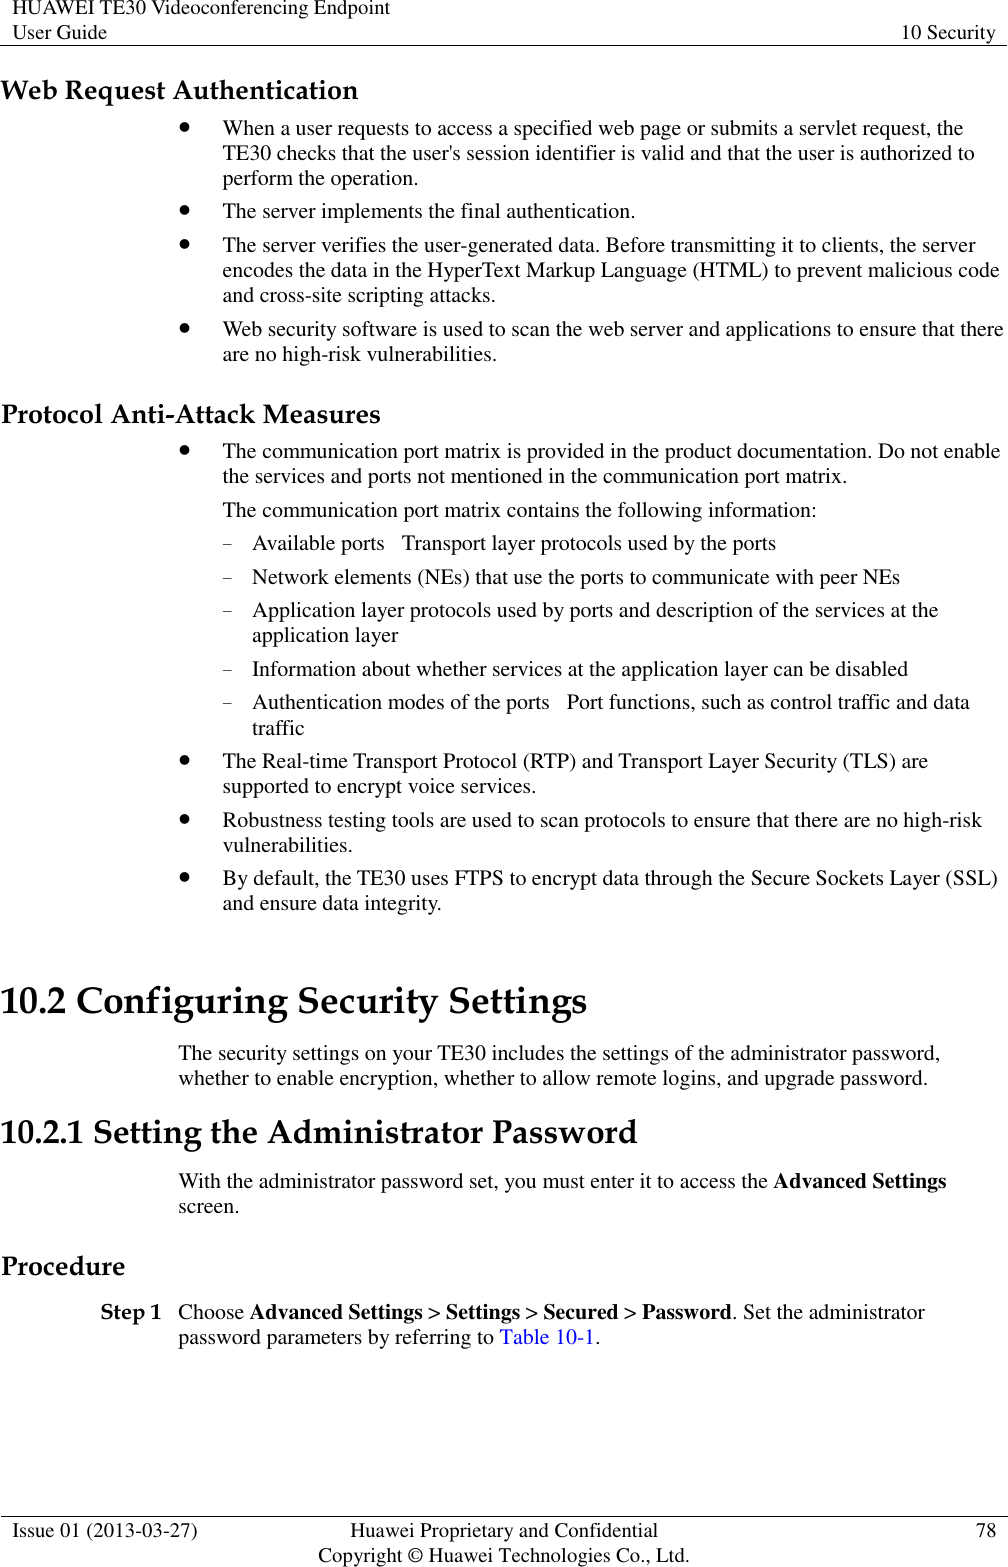 HUAWEI TE30 Videoconferencing Endpoint User Guide 10 Security  Issue 01 (2013-03-27) Huawei Proprietary and Confidential                                     Copyright © Huawei Technologies Co., Ltd. 78  Web Request Authentication  When a user requests to access a specified web page or submits a servlet request, the TE30 checks that the user&apos;s session identifier is valid and that the user is authorized to perform the operation.  The server implements the final authentication.  The server verifies the user-generated data. Before transmitting it to clients, the server encodes the data in the HyperText Markup Language (HTML) to prevent malicious code and cross-site scripting attacks.  Web security software is used to scan the web server and applications to ensure that there are no high-risk vulnerabilities. Protocol Anti-Attack Measures  The communication port matrix is provided in the product documentation. Do not enable the services and ports not mentioned in the communication port matrix.   The communication port matrix contains the following information:󲶉 − Available ports󲶉Transport layer protocols used by the ports − Network elements (NEs) that use the ports to communicate with peer NEs − Application layer protocols used by ports and description of the services at the application layer − Information about whether services at the application layer can be disabled − Authentication modes of the ports󲶉Port functions, such as control traffic and data traffic  The Real-time Transport Protocol (RTP) and Transport Layer Security (TLS) are supported to encrypt voice services.    Robustness testing tools are used to scan protocols to ensure that there are no high-risk vulnerabilities.  By default, the TE30 uses FTPS to encrypt data through the Secure Sockets Layer (SSL) and ensure data integrity. 10.2 Configuring Security Settings The security settings on your TE30 includes the settings of the administrator password, whether to enable encryption, whether to allow remote logins, and upgrade password. 10.2.1 Setting the Administrator Password With the administrator password set, you must enter it to access the Advanced Settings screen. Procedure Step 1 Choose Advanced Settings &gt; Settings &gt; Secured &gt; Password. Set the administrator password parameters by referring to Table 10-1. 